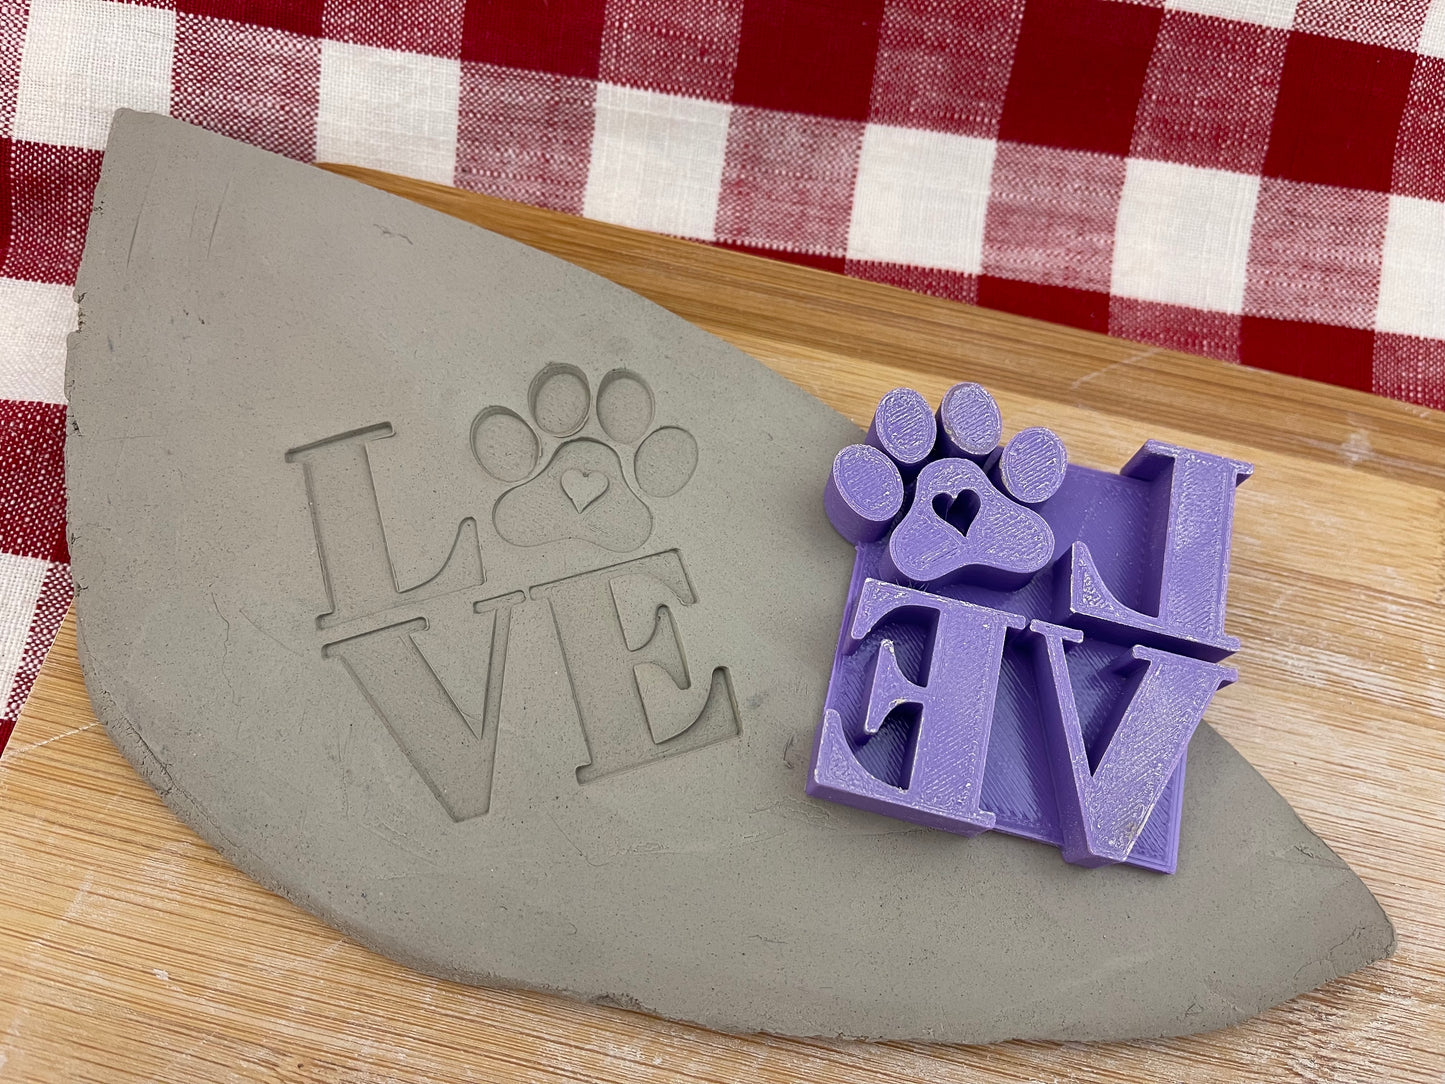 2.5" LOVE with Paw print word design, Pottery Stamp for Charity, Limited edition Purple, all money is donated to a local animal shelter